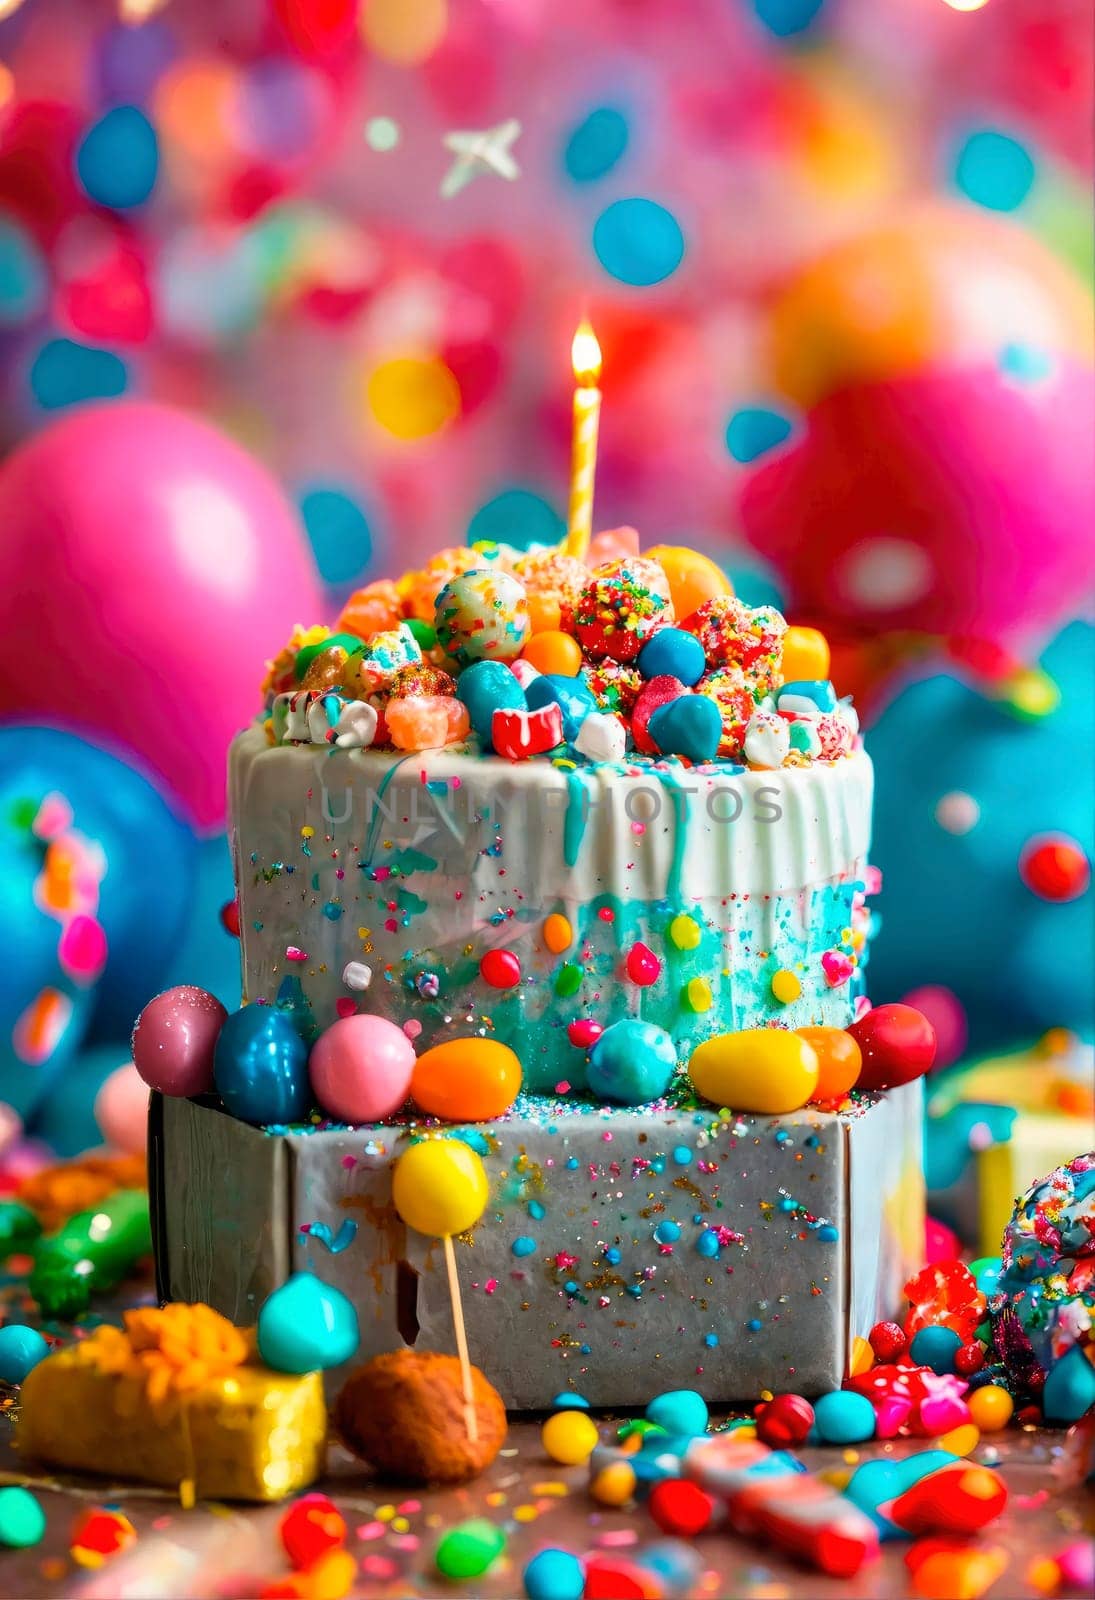 candy sweets and birthday cake. selective focus. by yanadjana